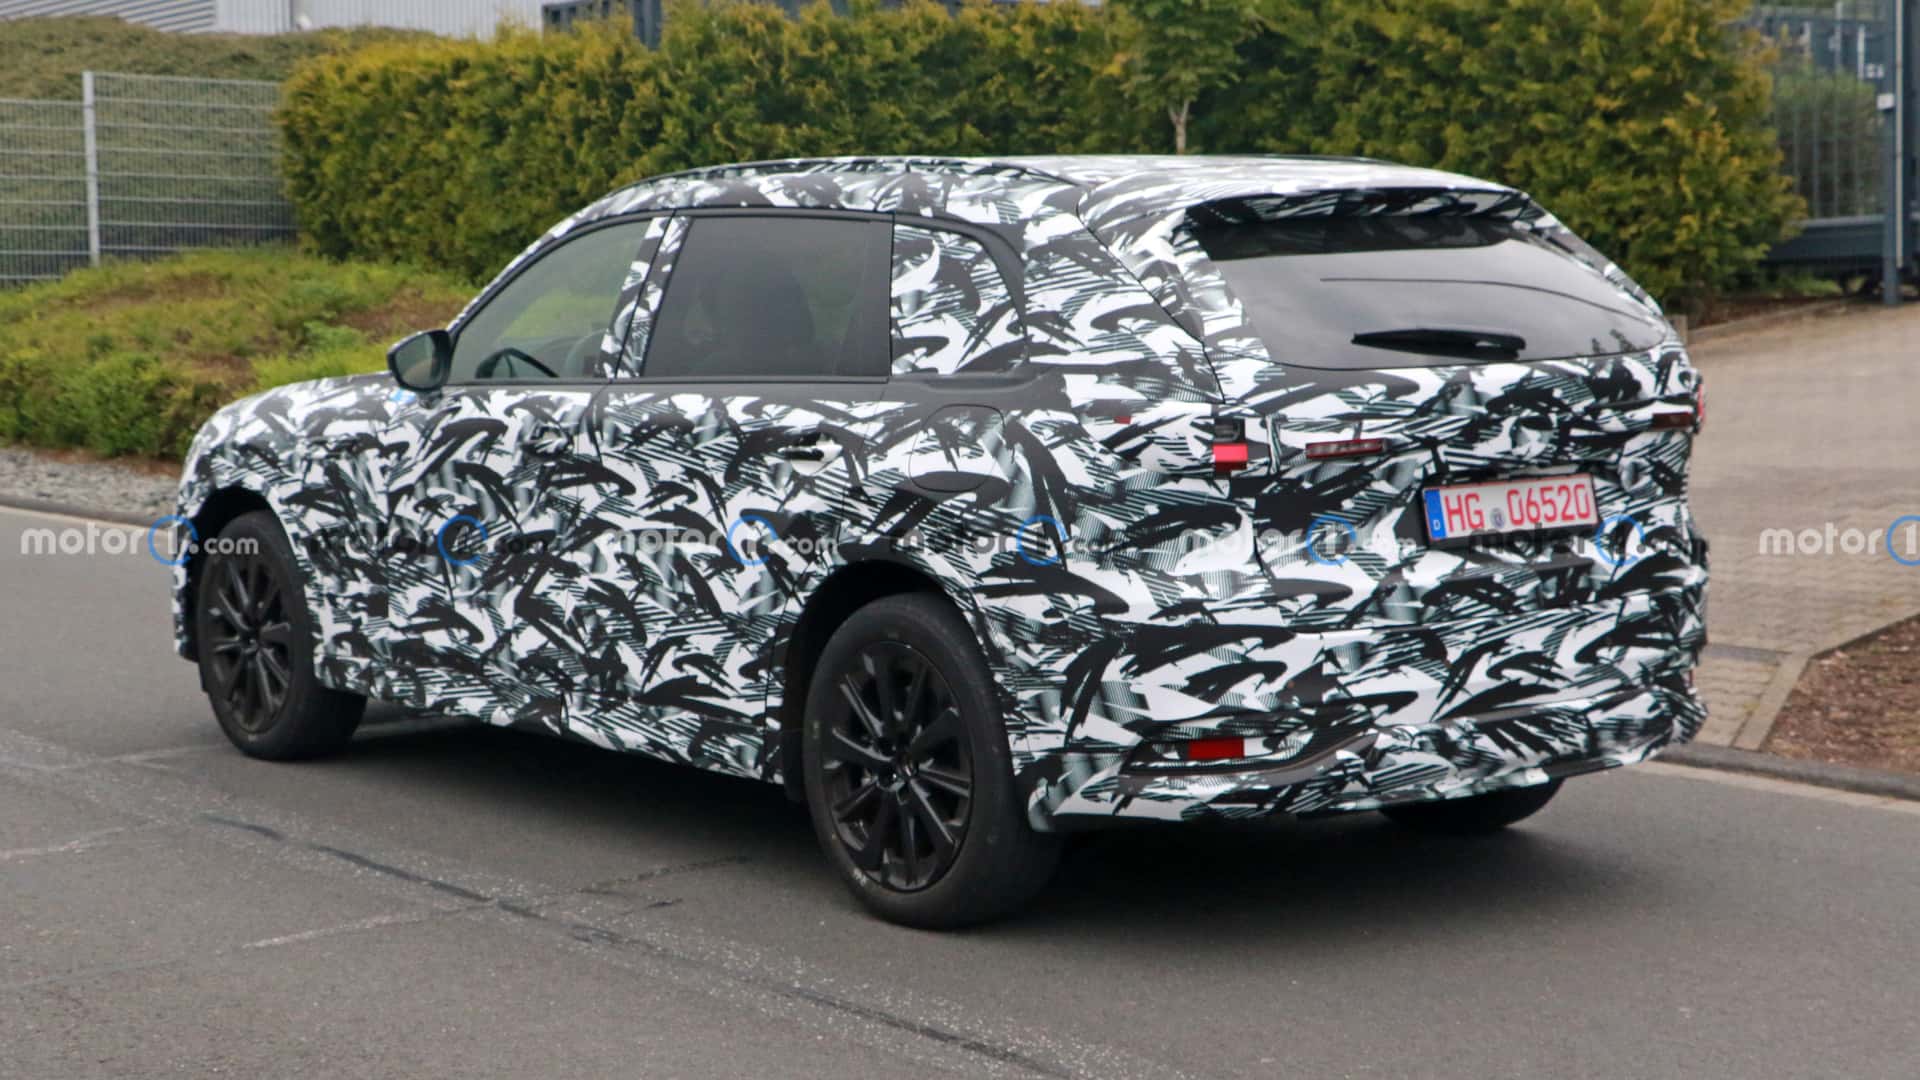 Spotted in full-body camouflage wrap, the upcoming Mazda CX-80, featuring three rows, was caught by spy photographers